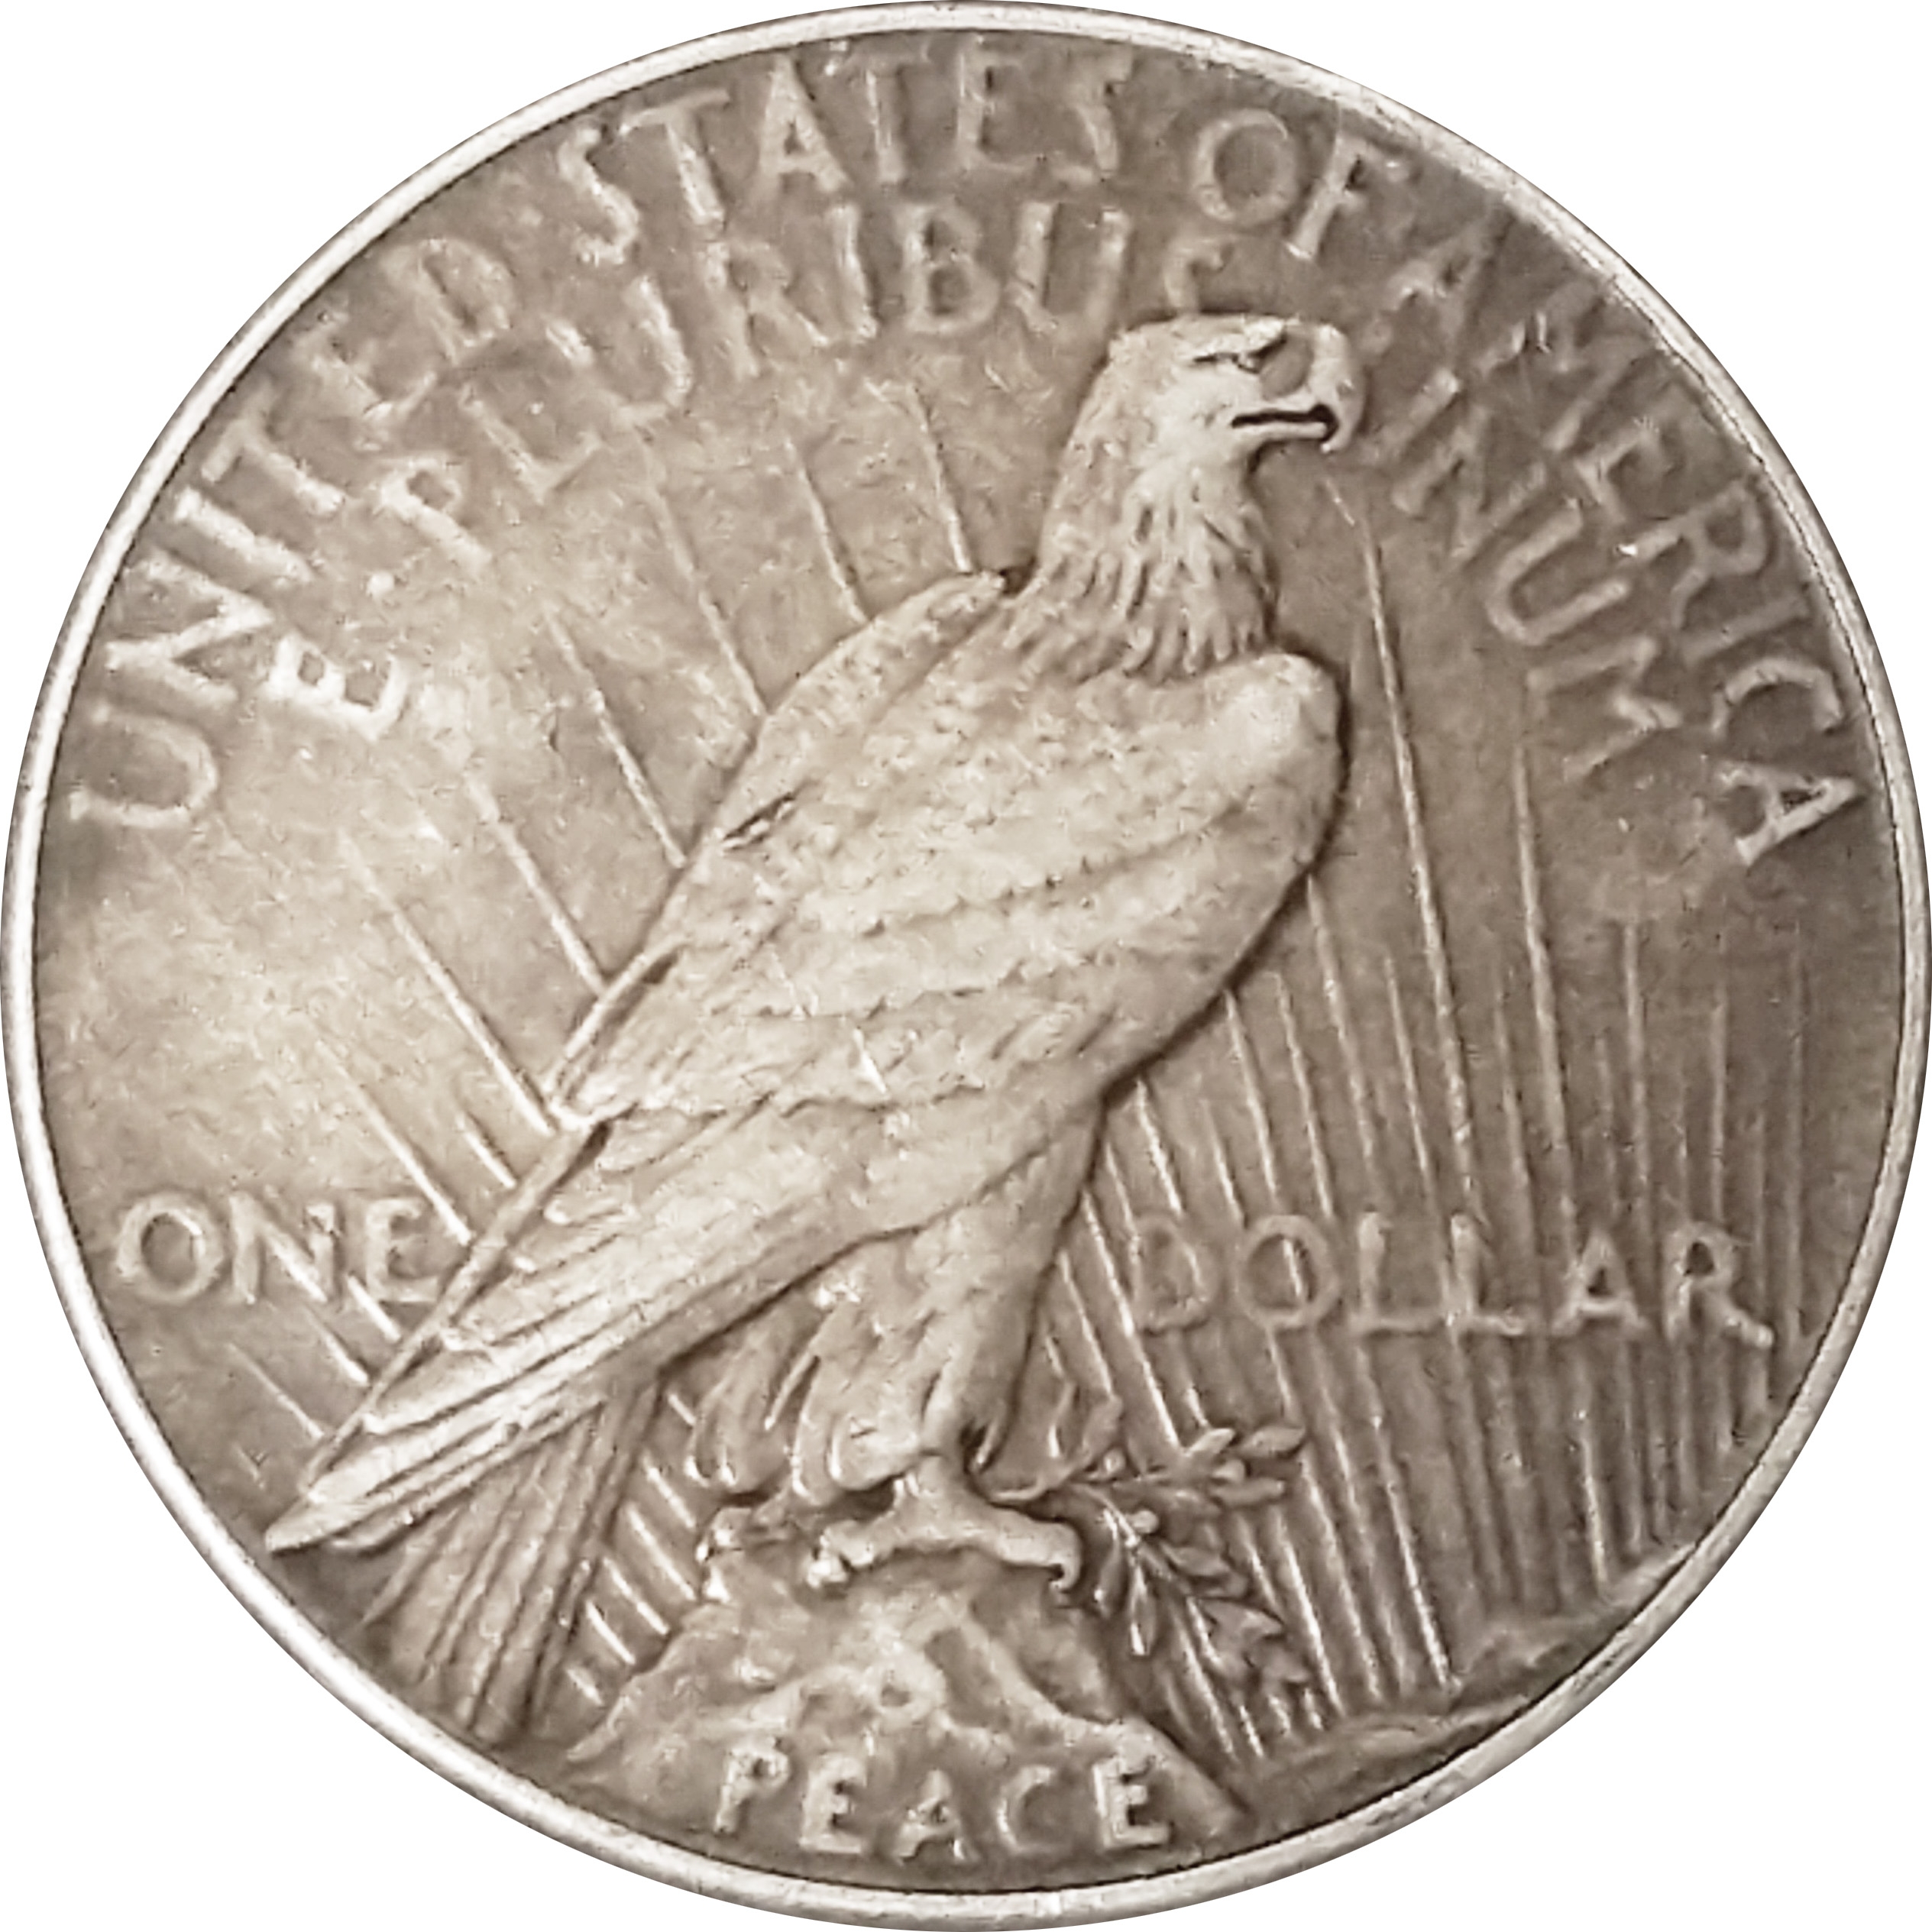 GREAT COLLECTIBLE DATES! 1927-1935 PEACE SILVER DOLLAR GOOD AND BETTER